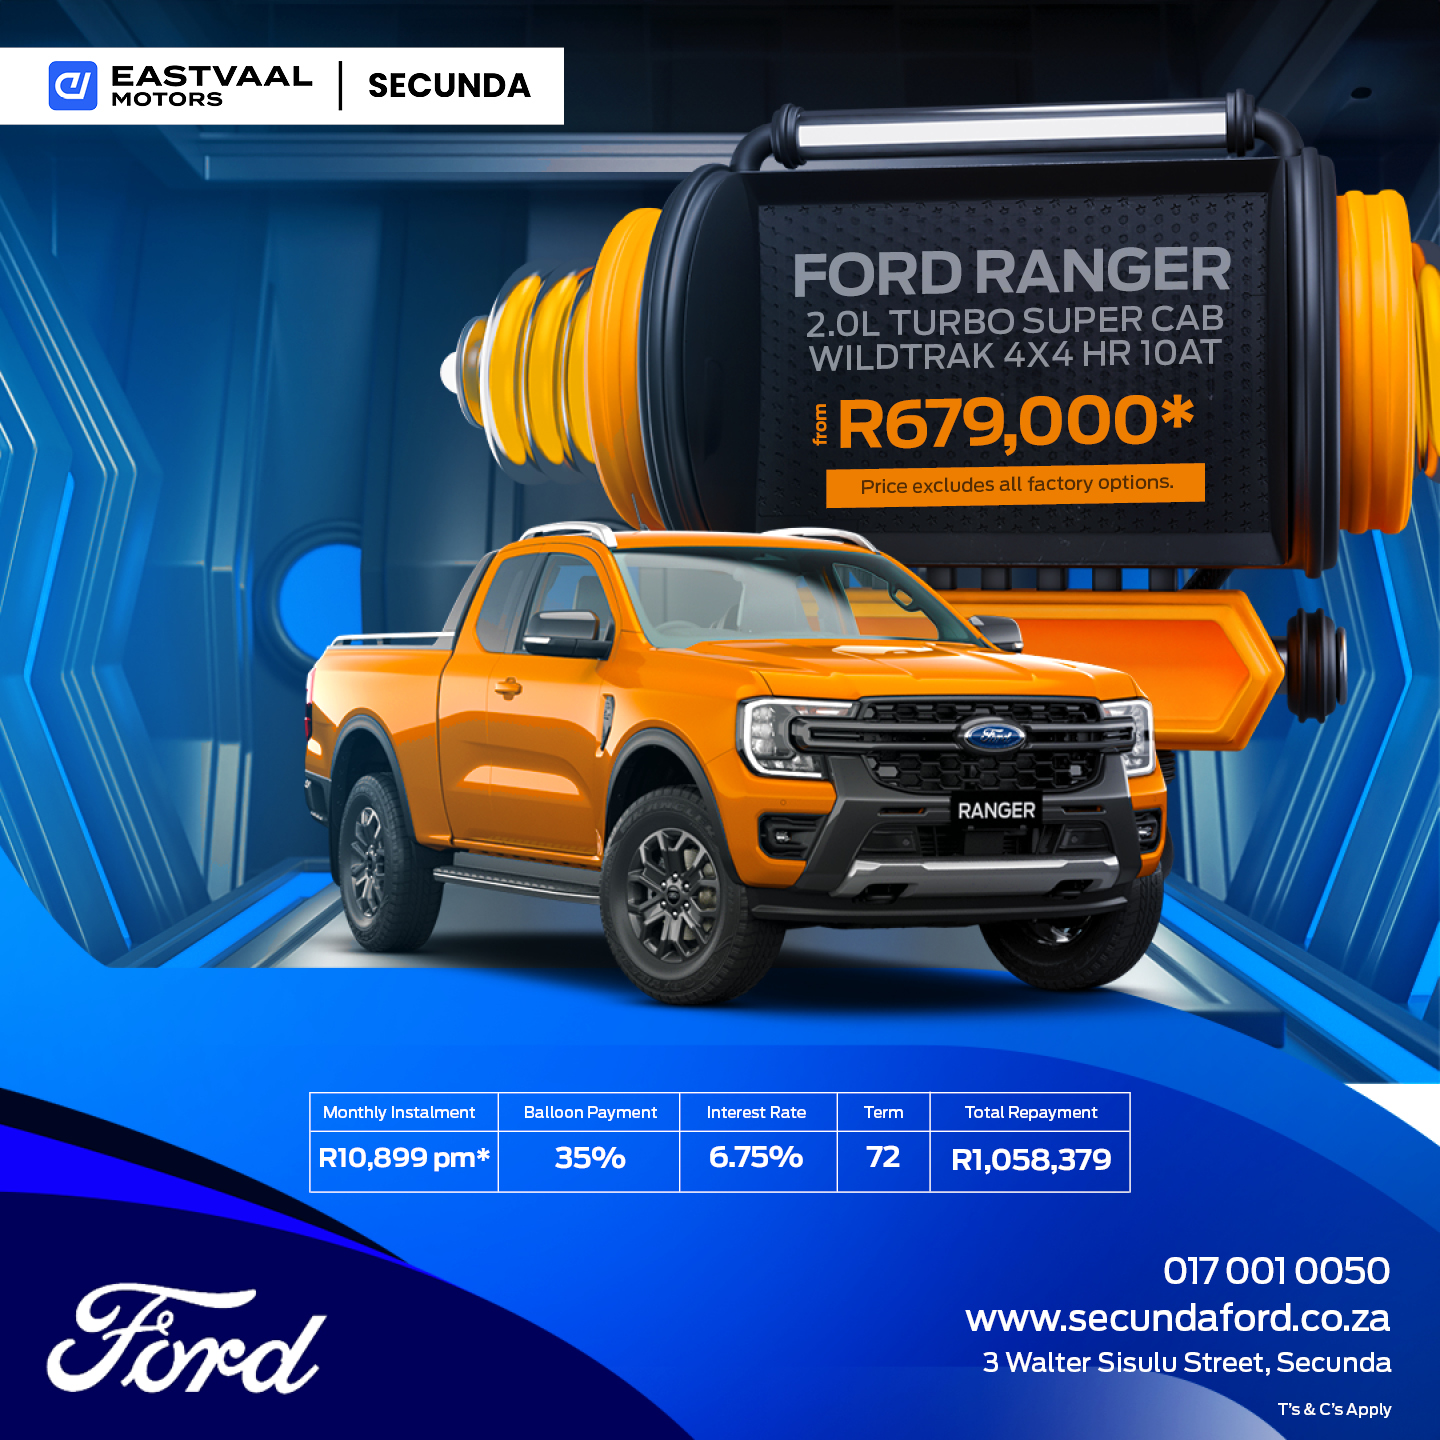 Ford Ranger 2.0L Turbo Super Cab WildTrak 4×4 HR 10AT image from 